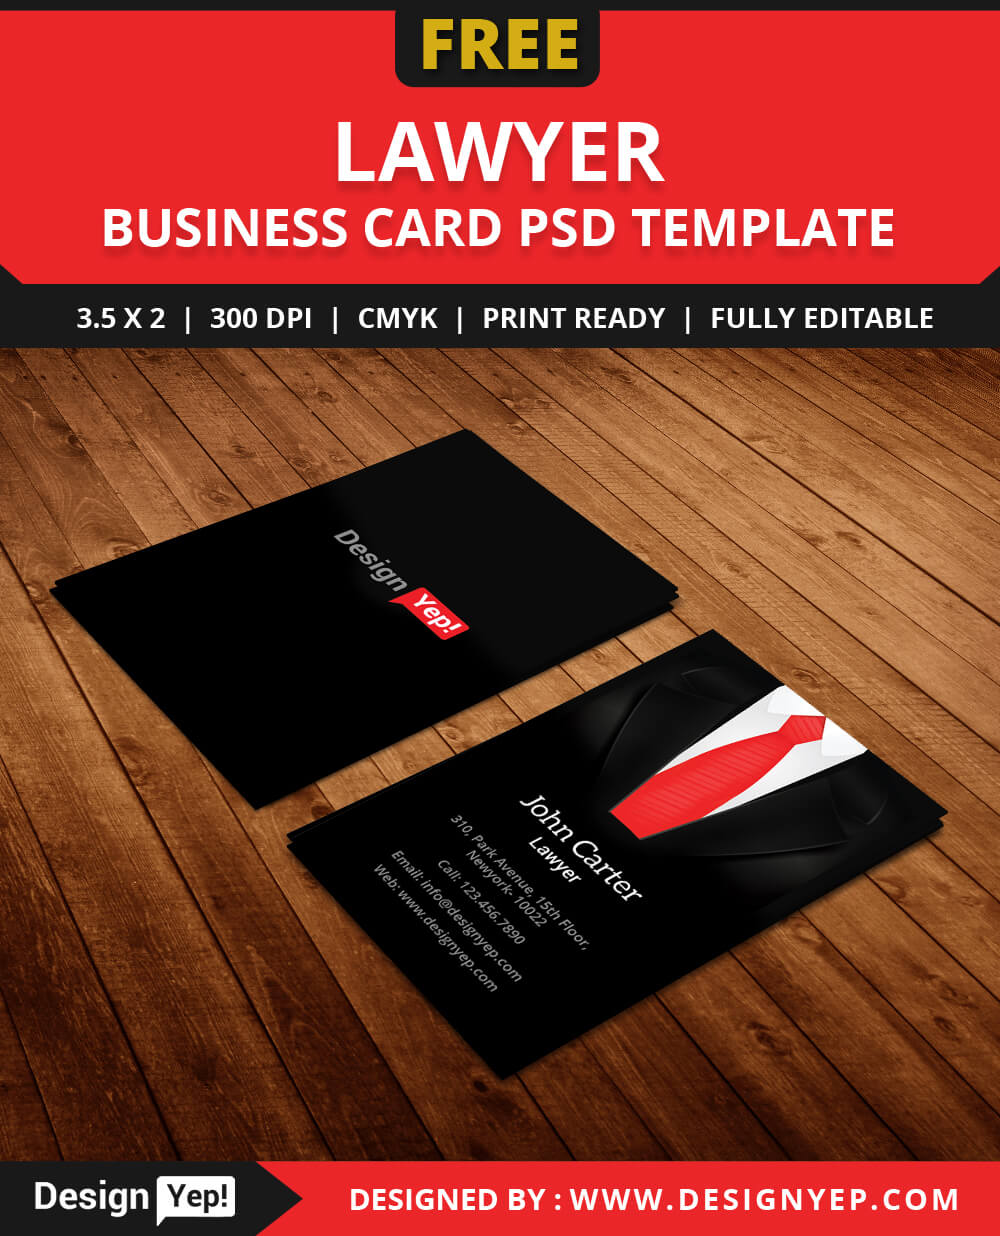 Free Lawyer Business Card Template Psd – Designyep With Regard To Legal Business Cards Templates Free